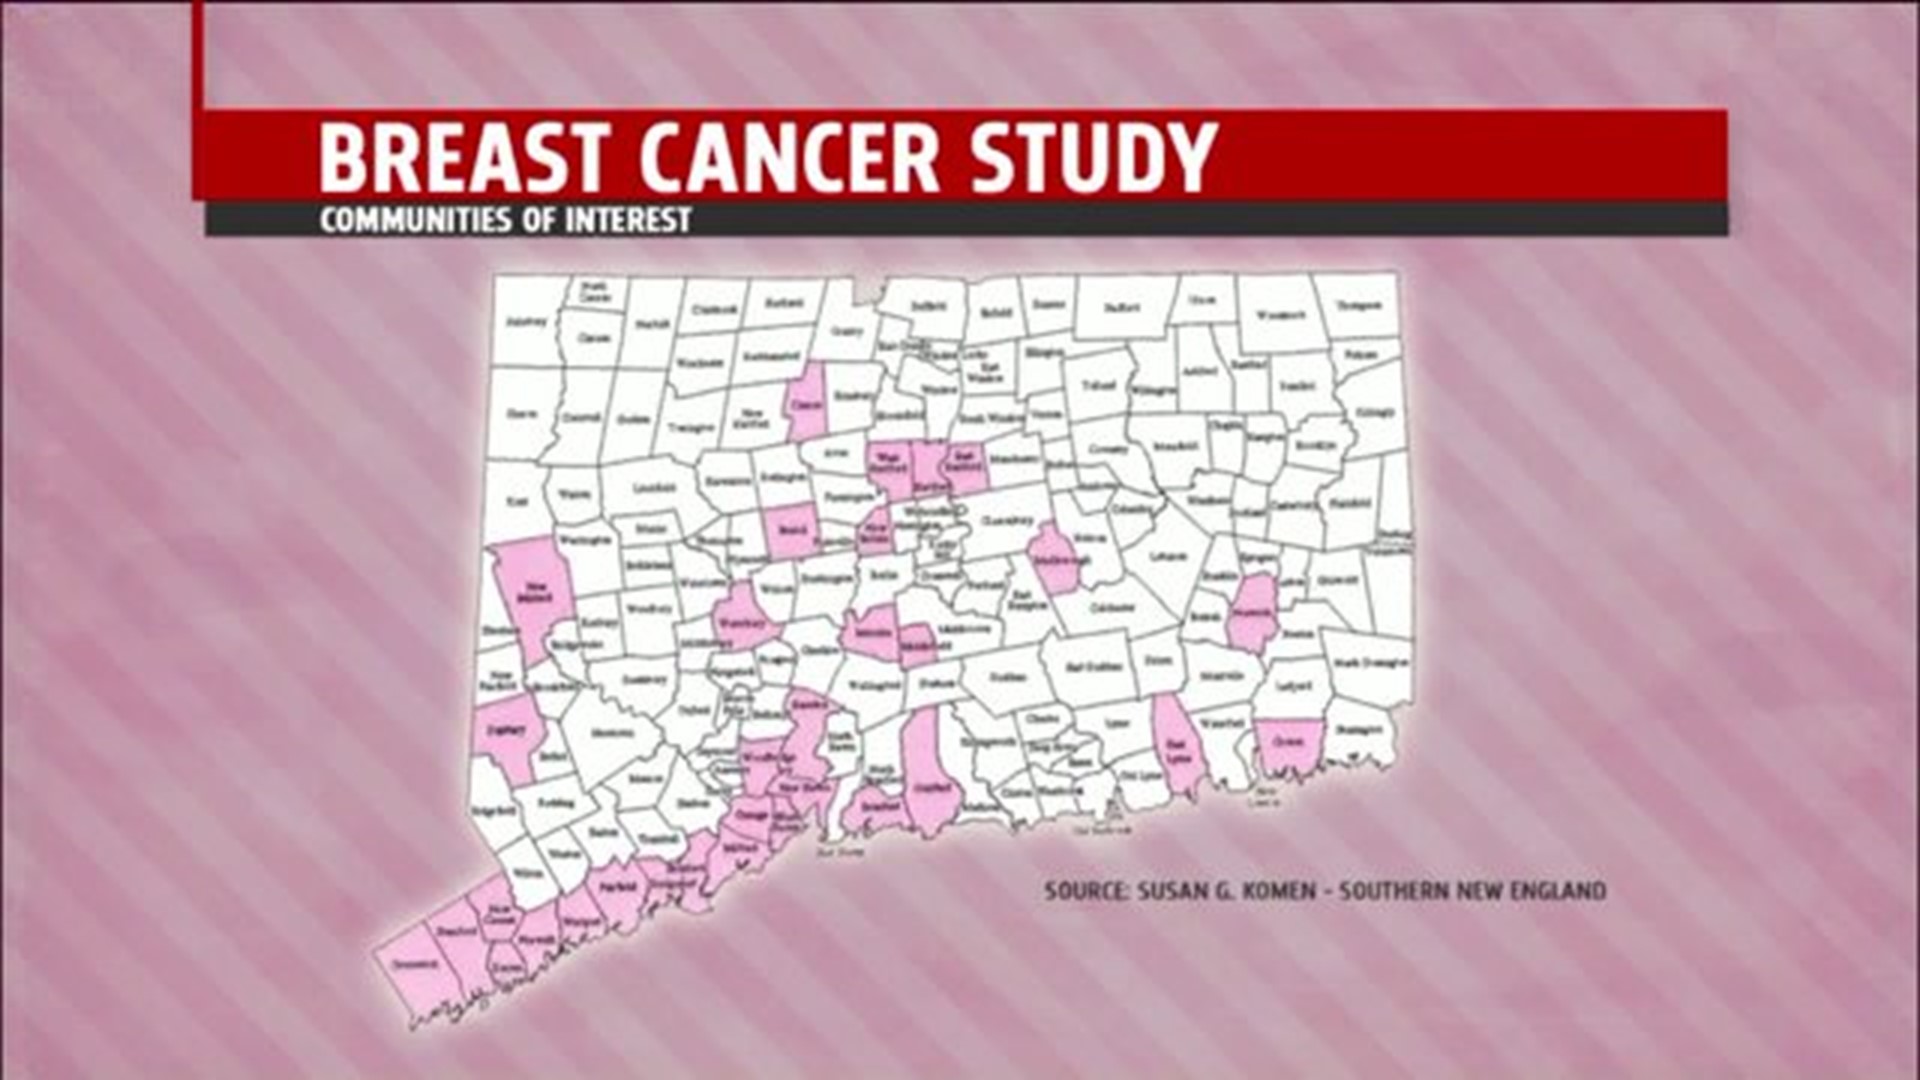 Higher-than-average rates of breast cancer of concern in Connecticut